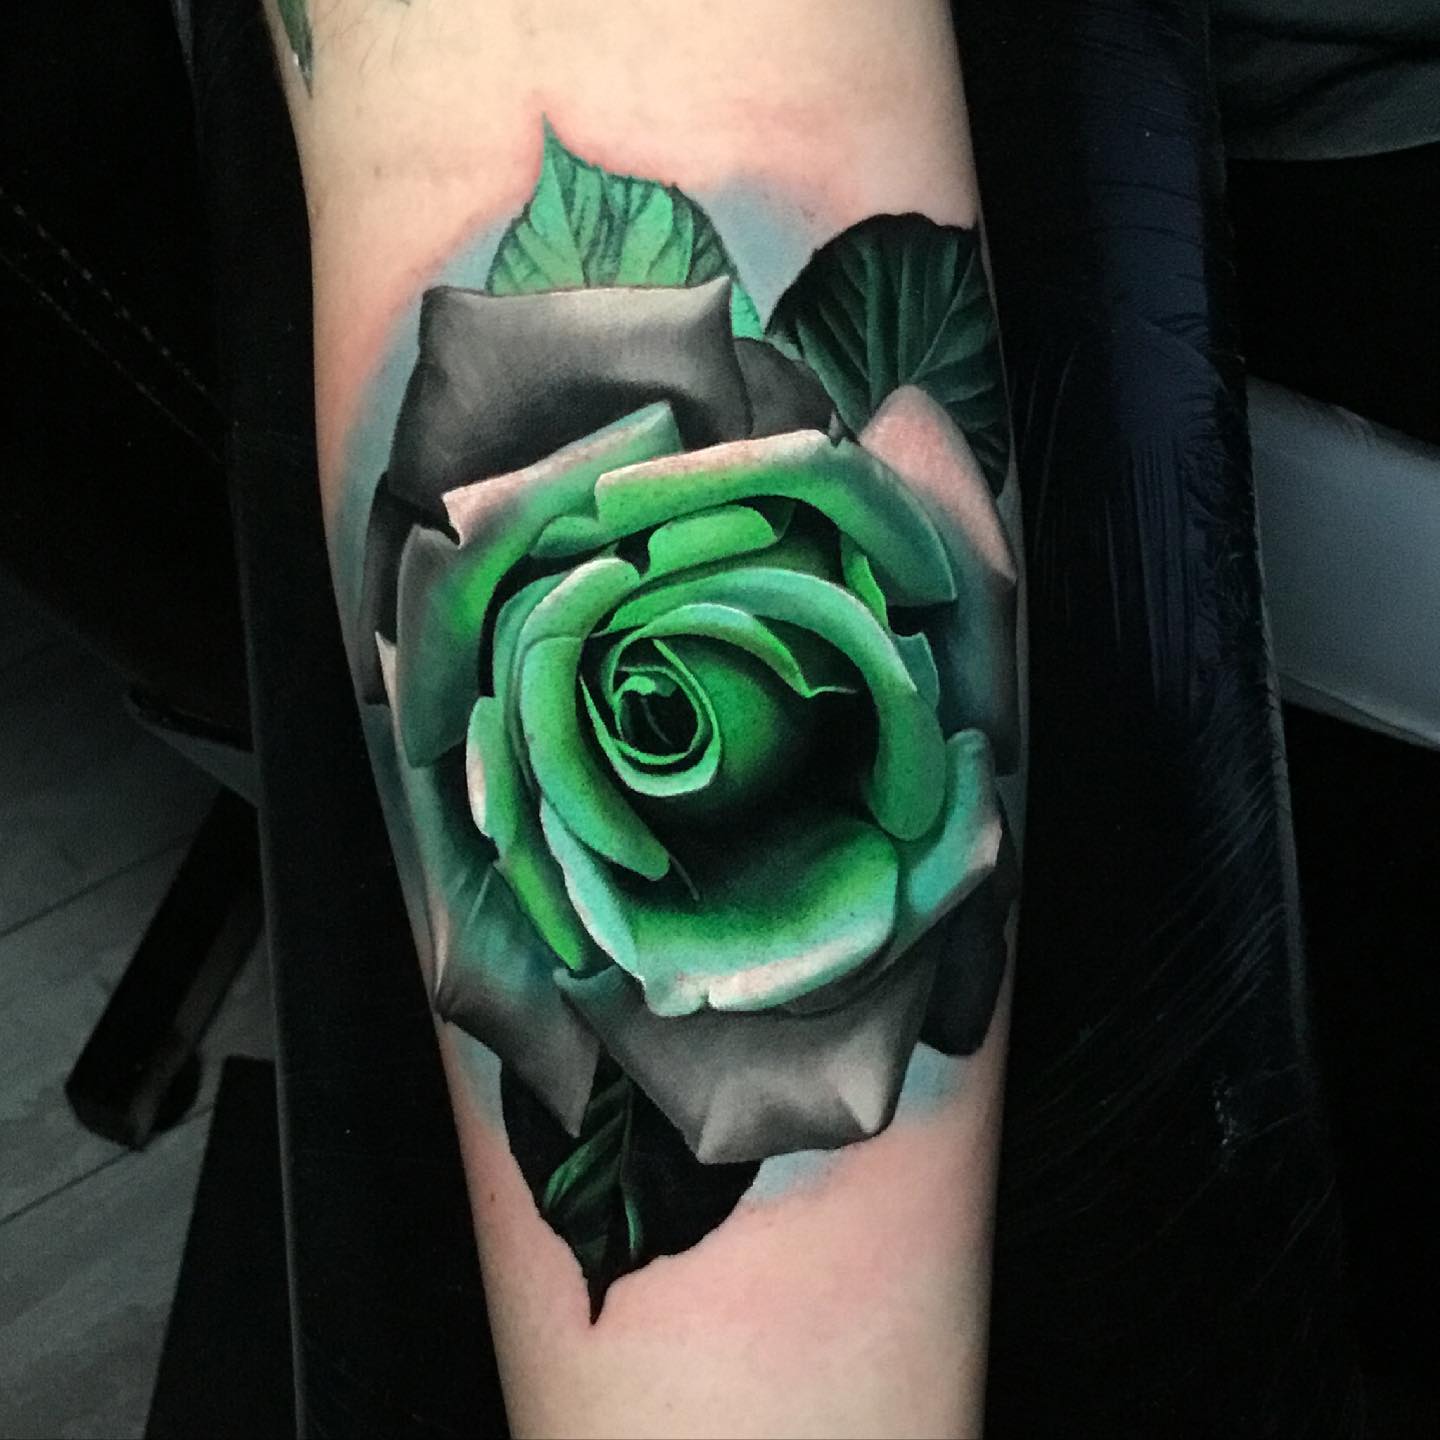 green rose tattoo on the forearm